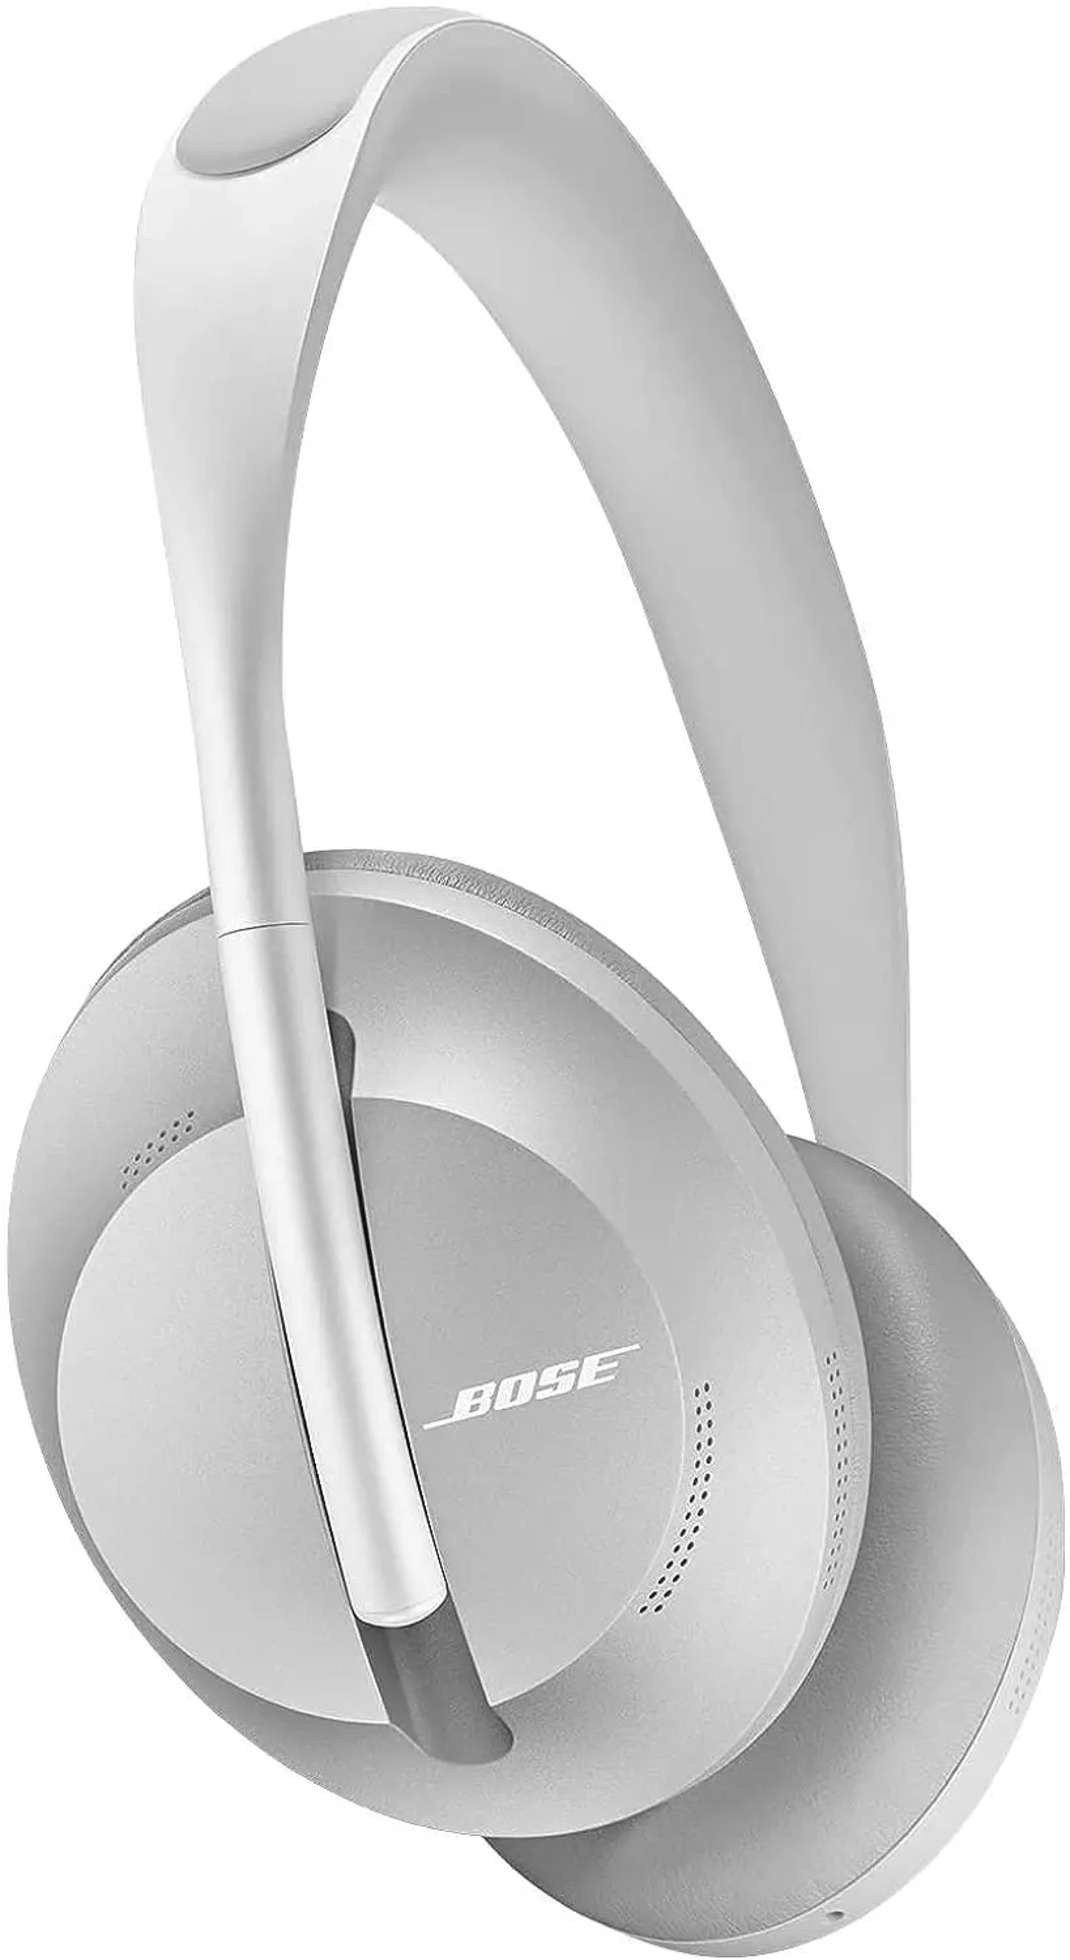 Compare Bose Luxe) with Bose Cancelling - Headphones (Champagne (Sliver One Over Ear 700 Bluetooth Headphones (Sliver Mic Noise JBL Bluetooth Cancelling Bluetooth Headphone 700 v5.3 M2 the vs Tour Gold) Noise